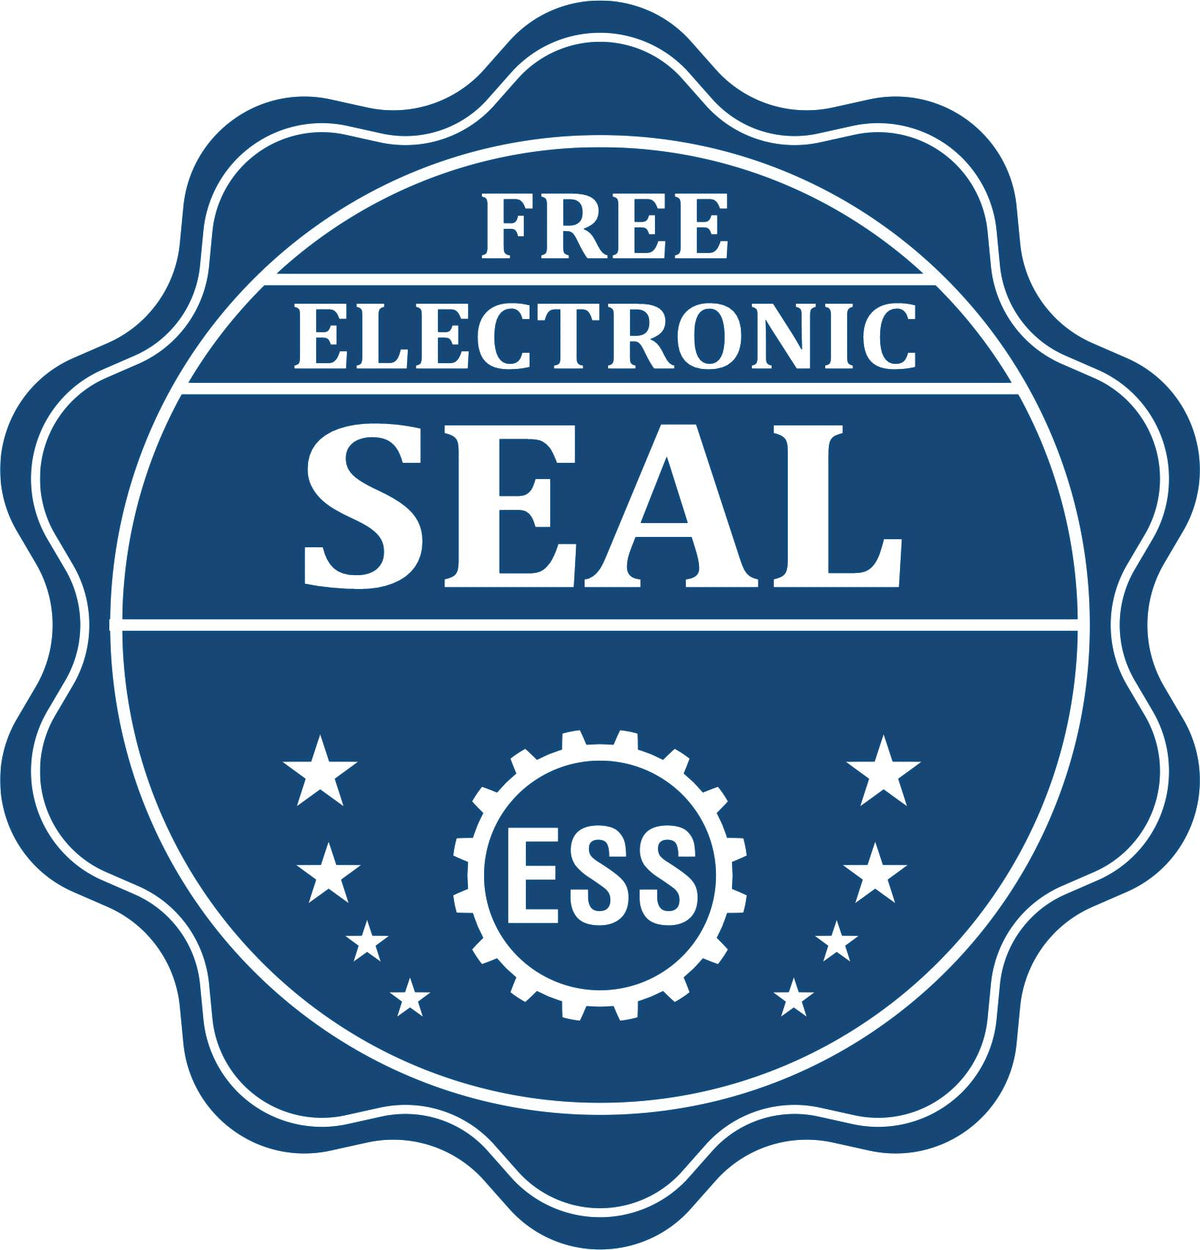 A badge showing a free electronic seal for the Soft Massachusetts Professional Engineer Seal with stars and the ESS gear on the emblem.